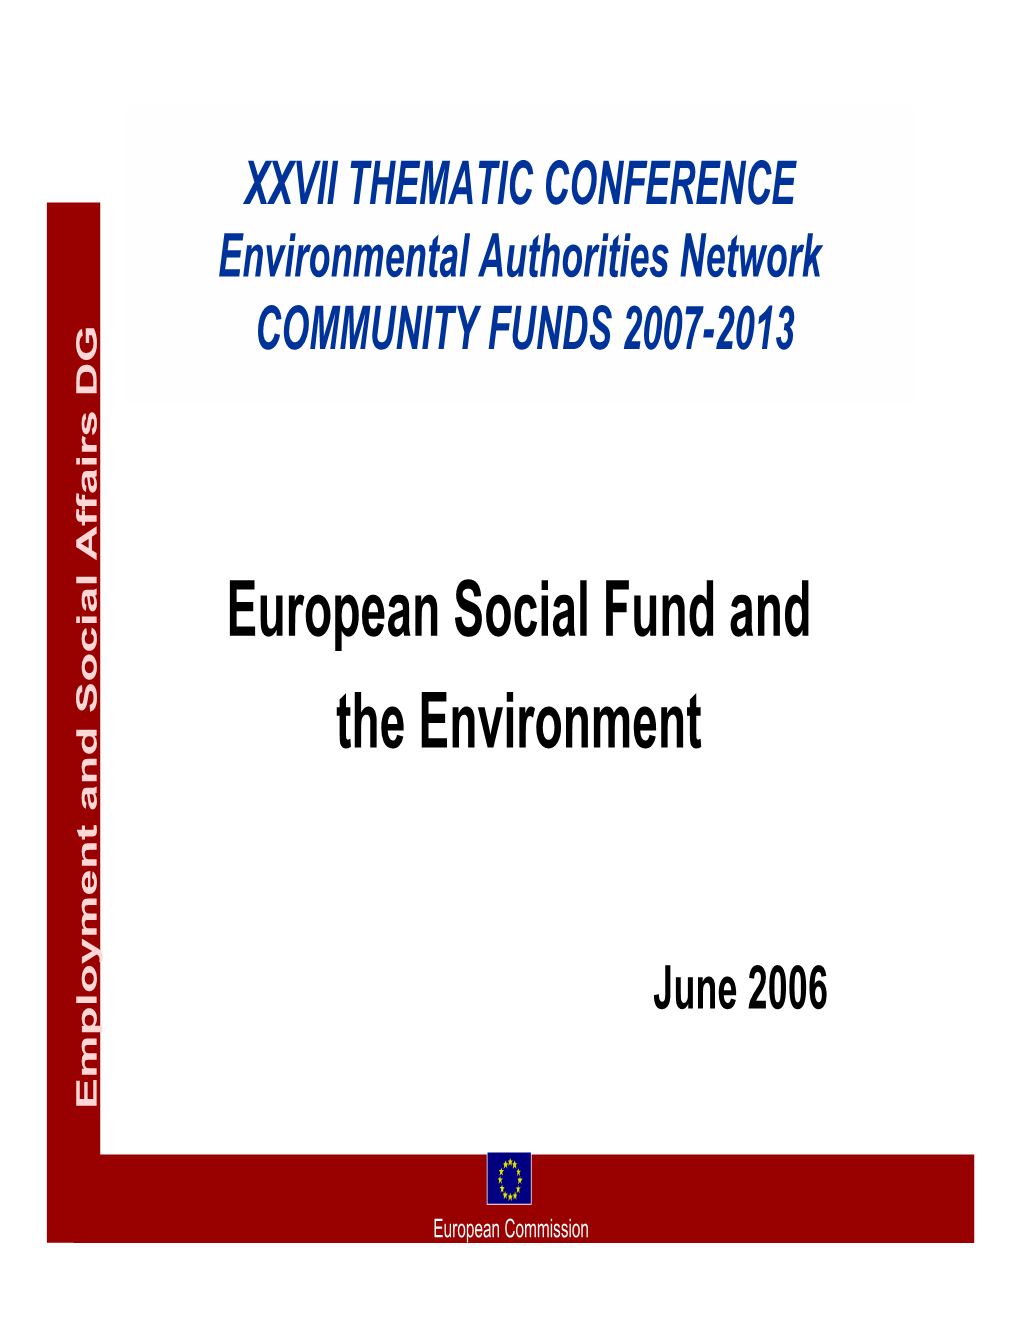 European Social Fund and the Environment